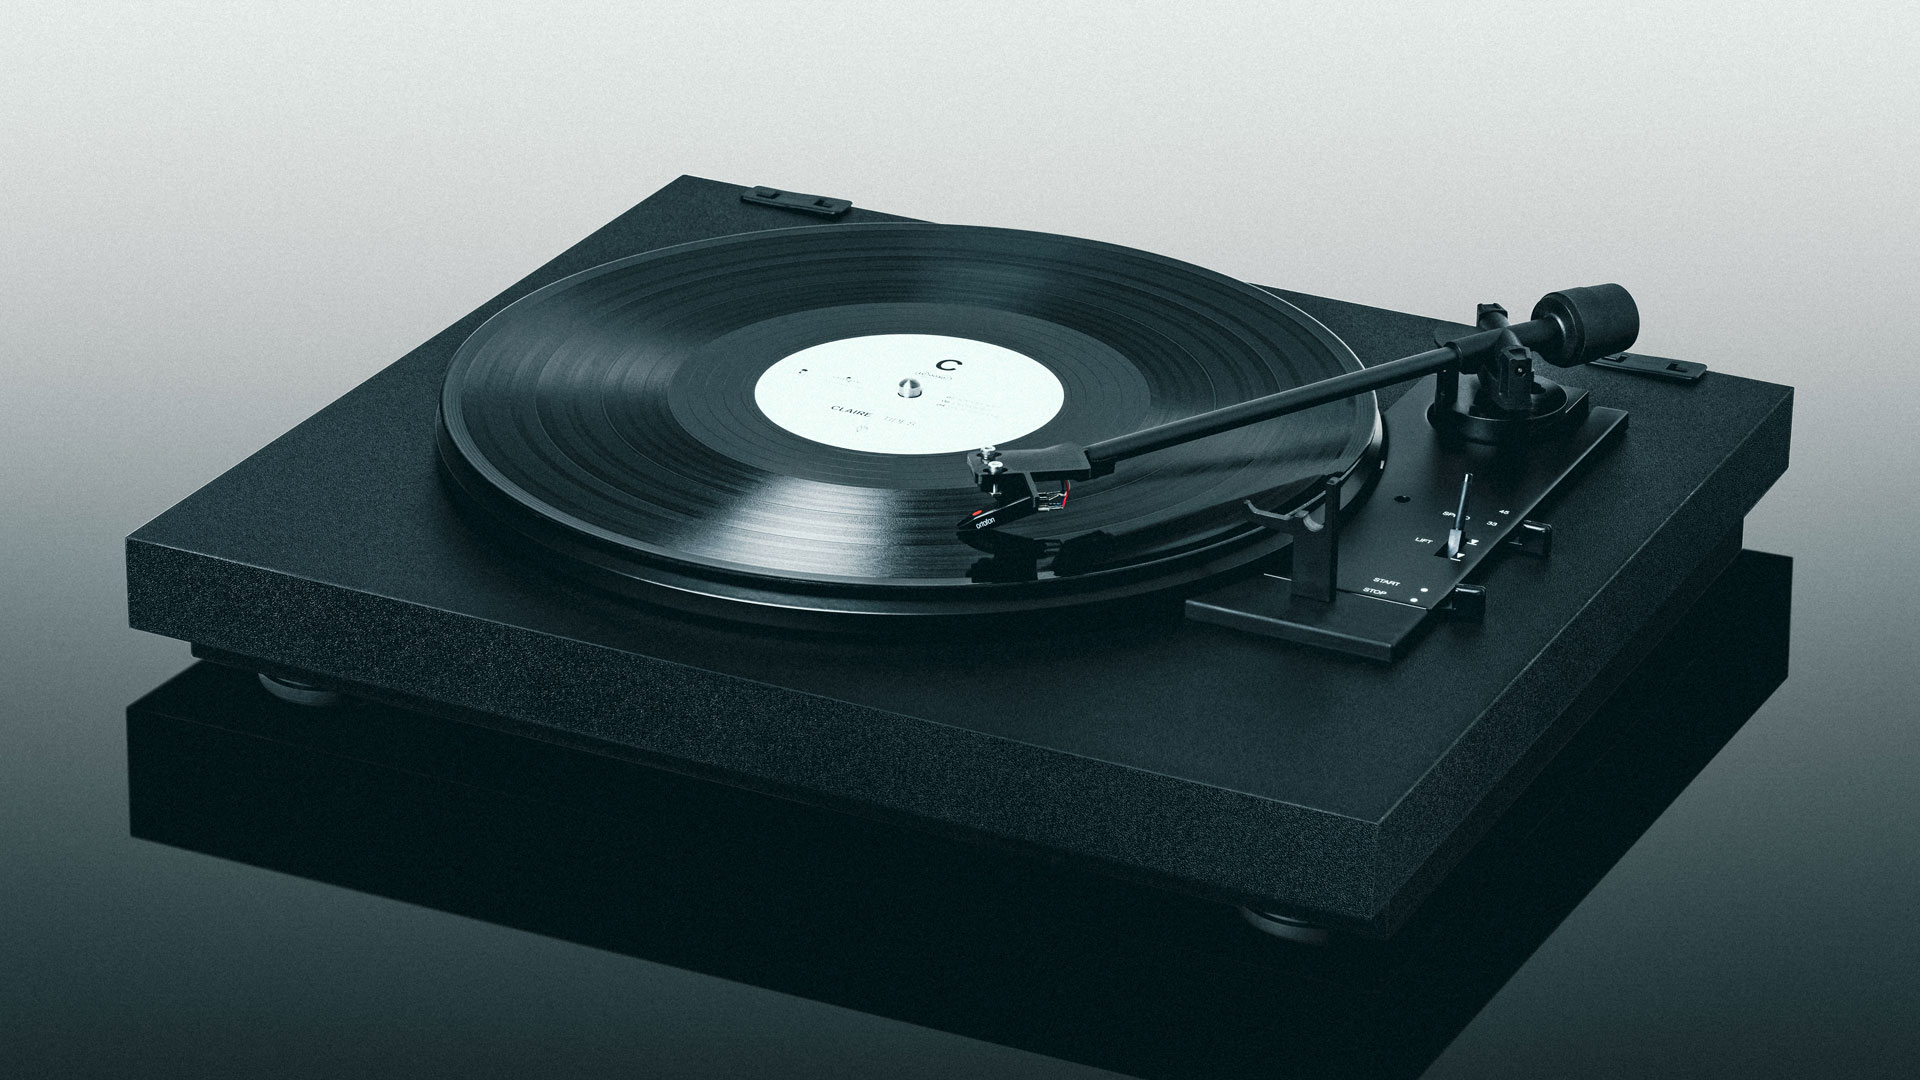 The new A1 from Pro-Ject (Image Credit: Pro-Ject)